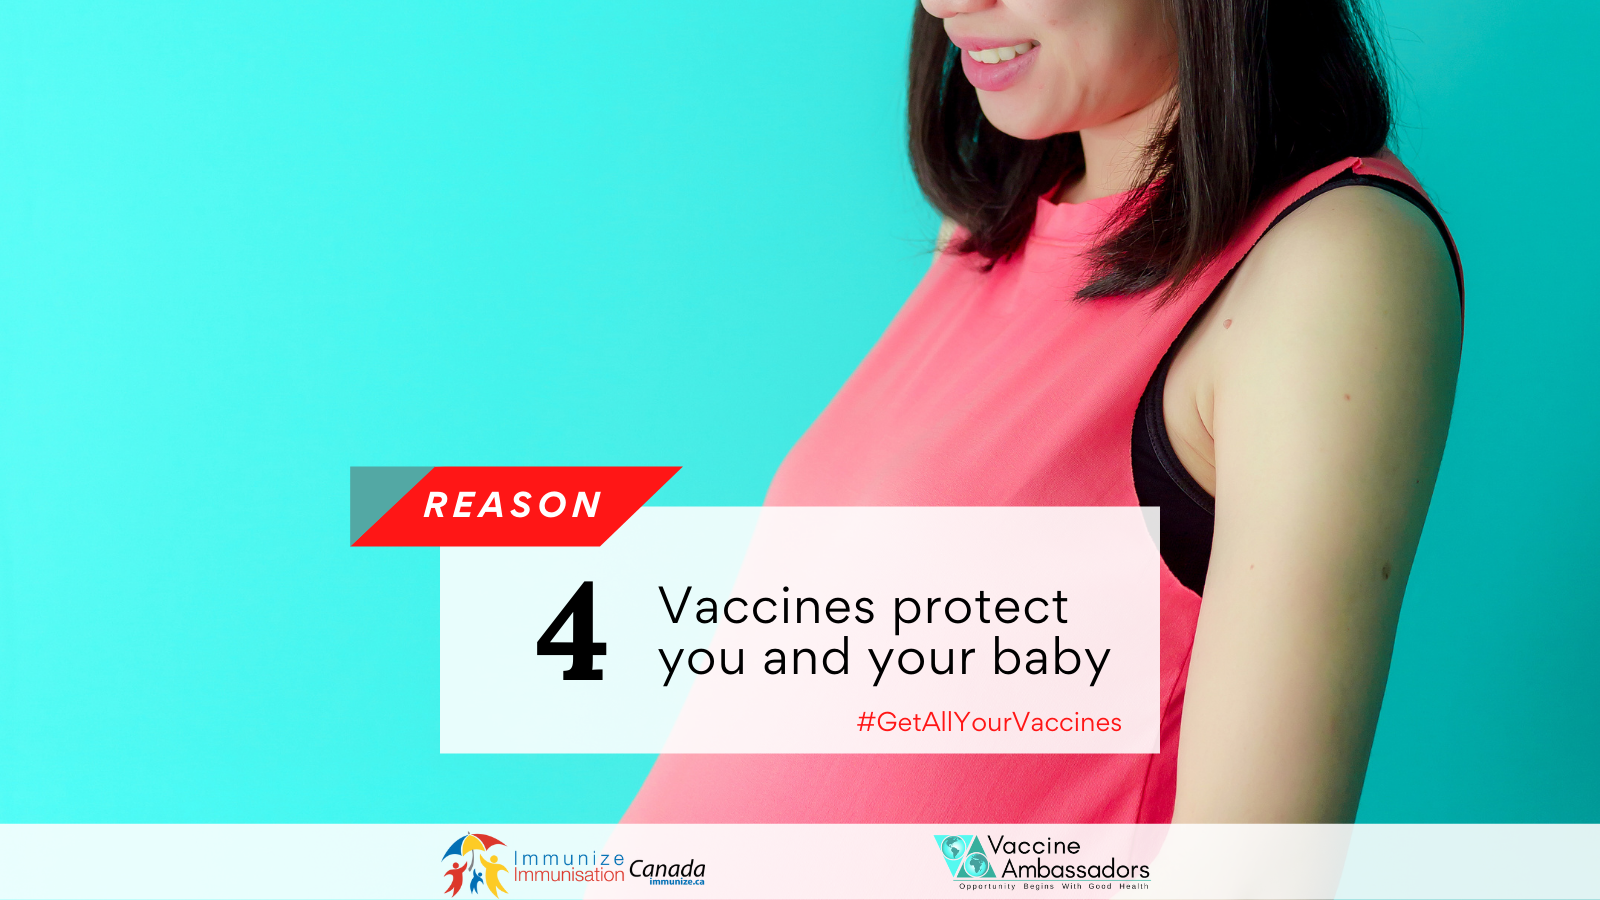 Reason 4 - Vaccines protect you and your baby - Twitter